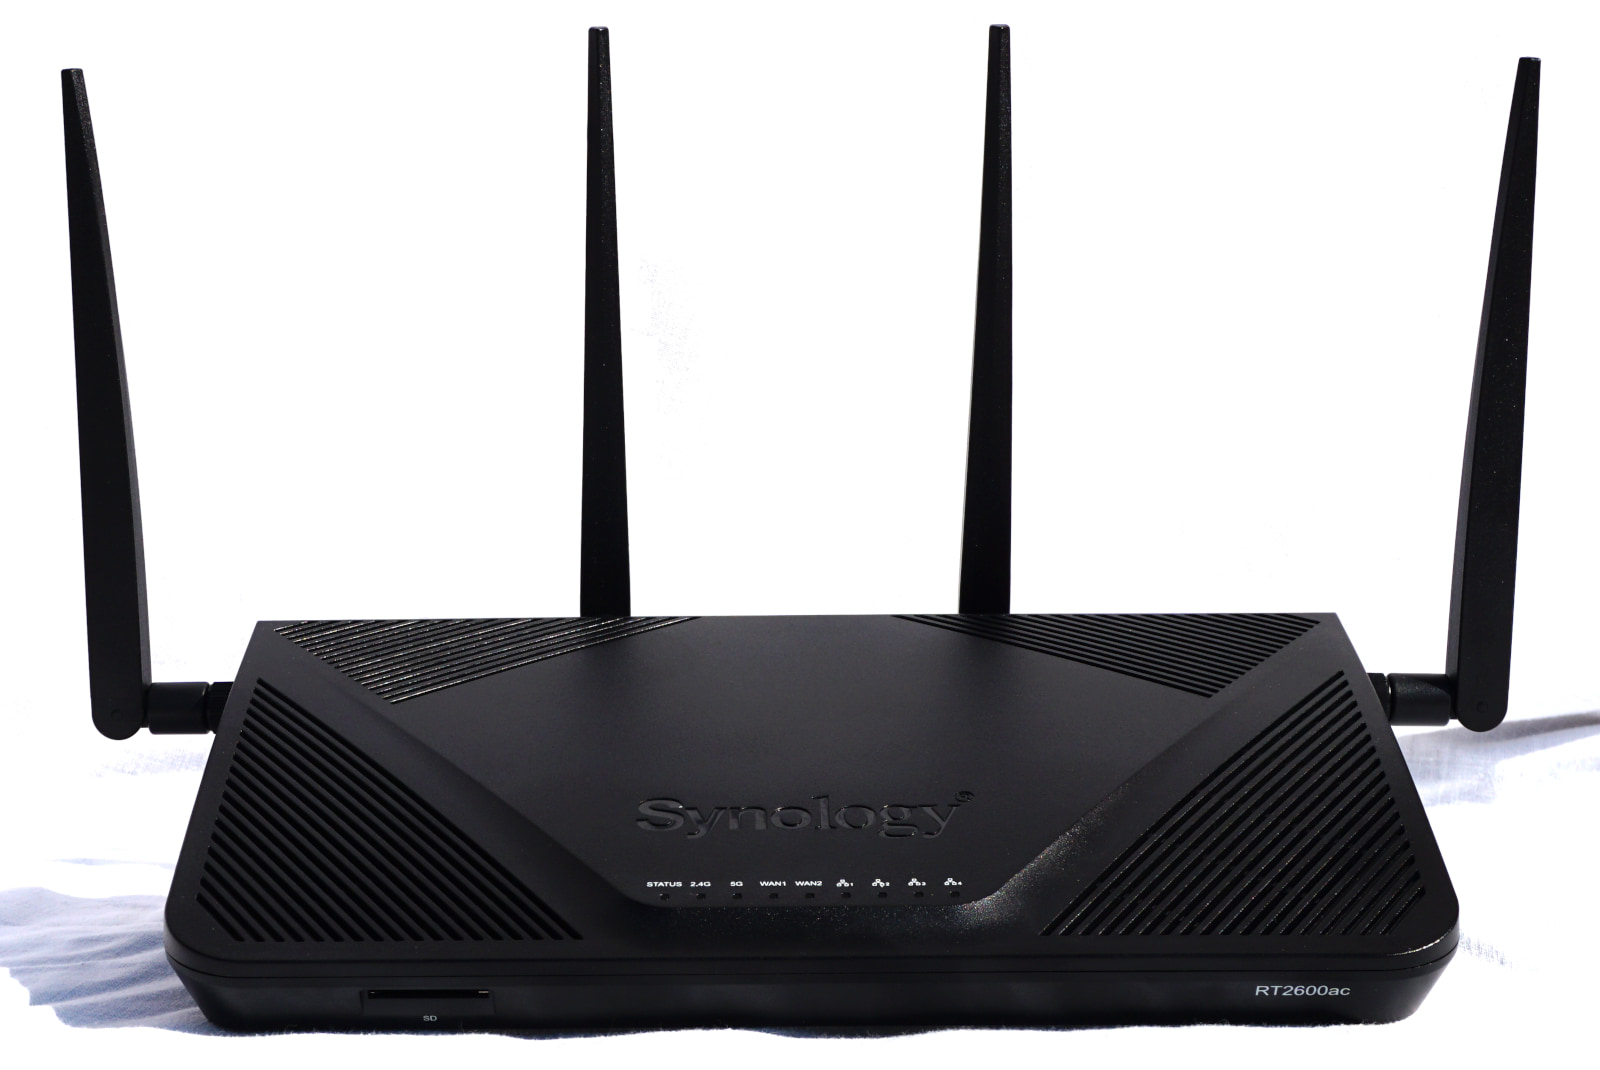 Front shot of Synology RT2600ac router